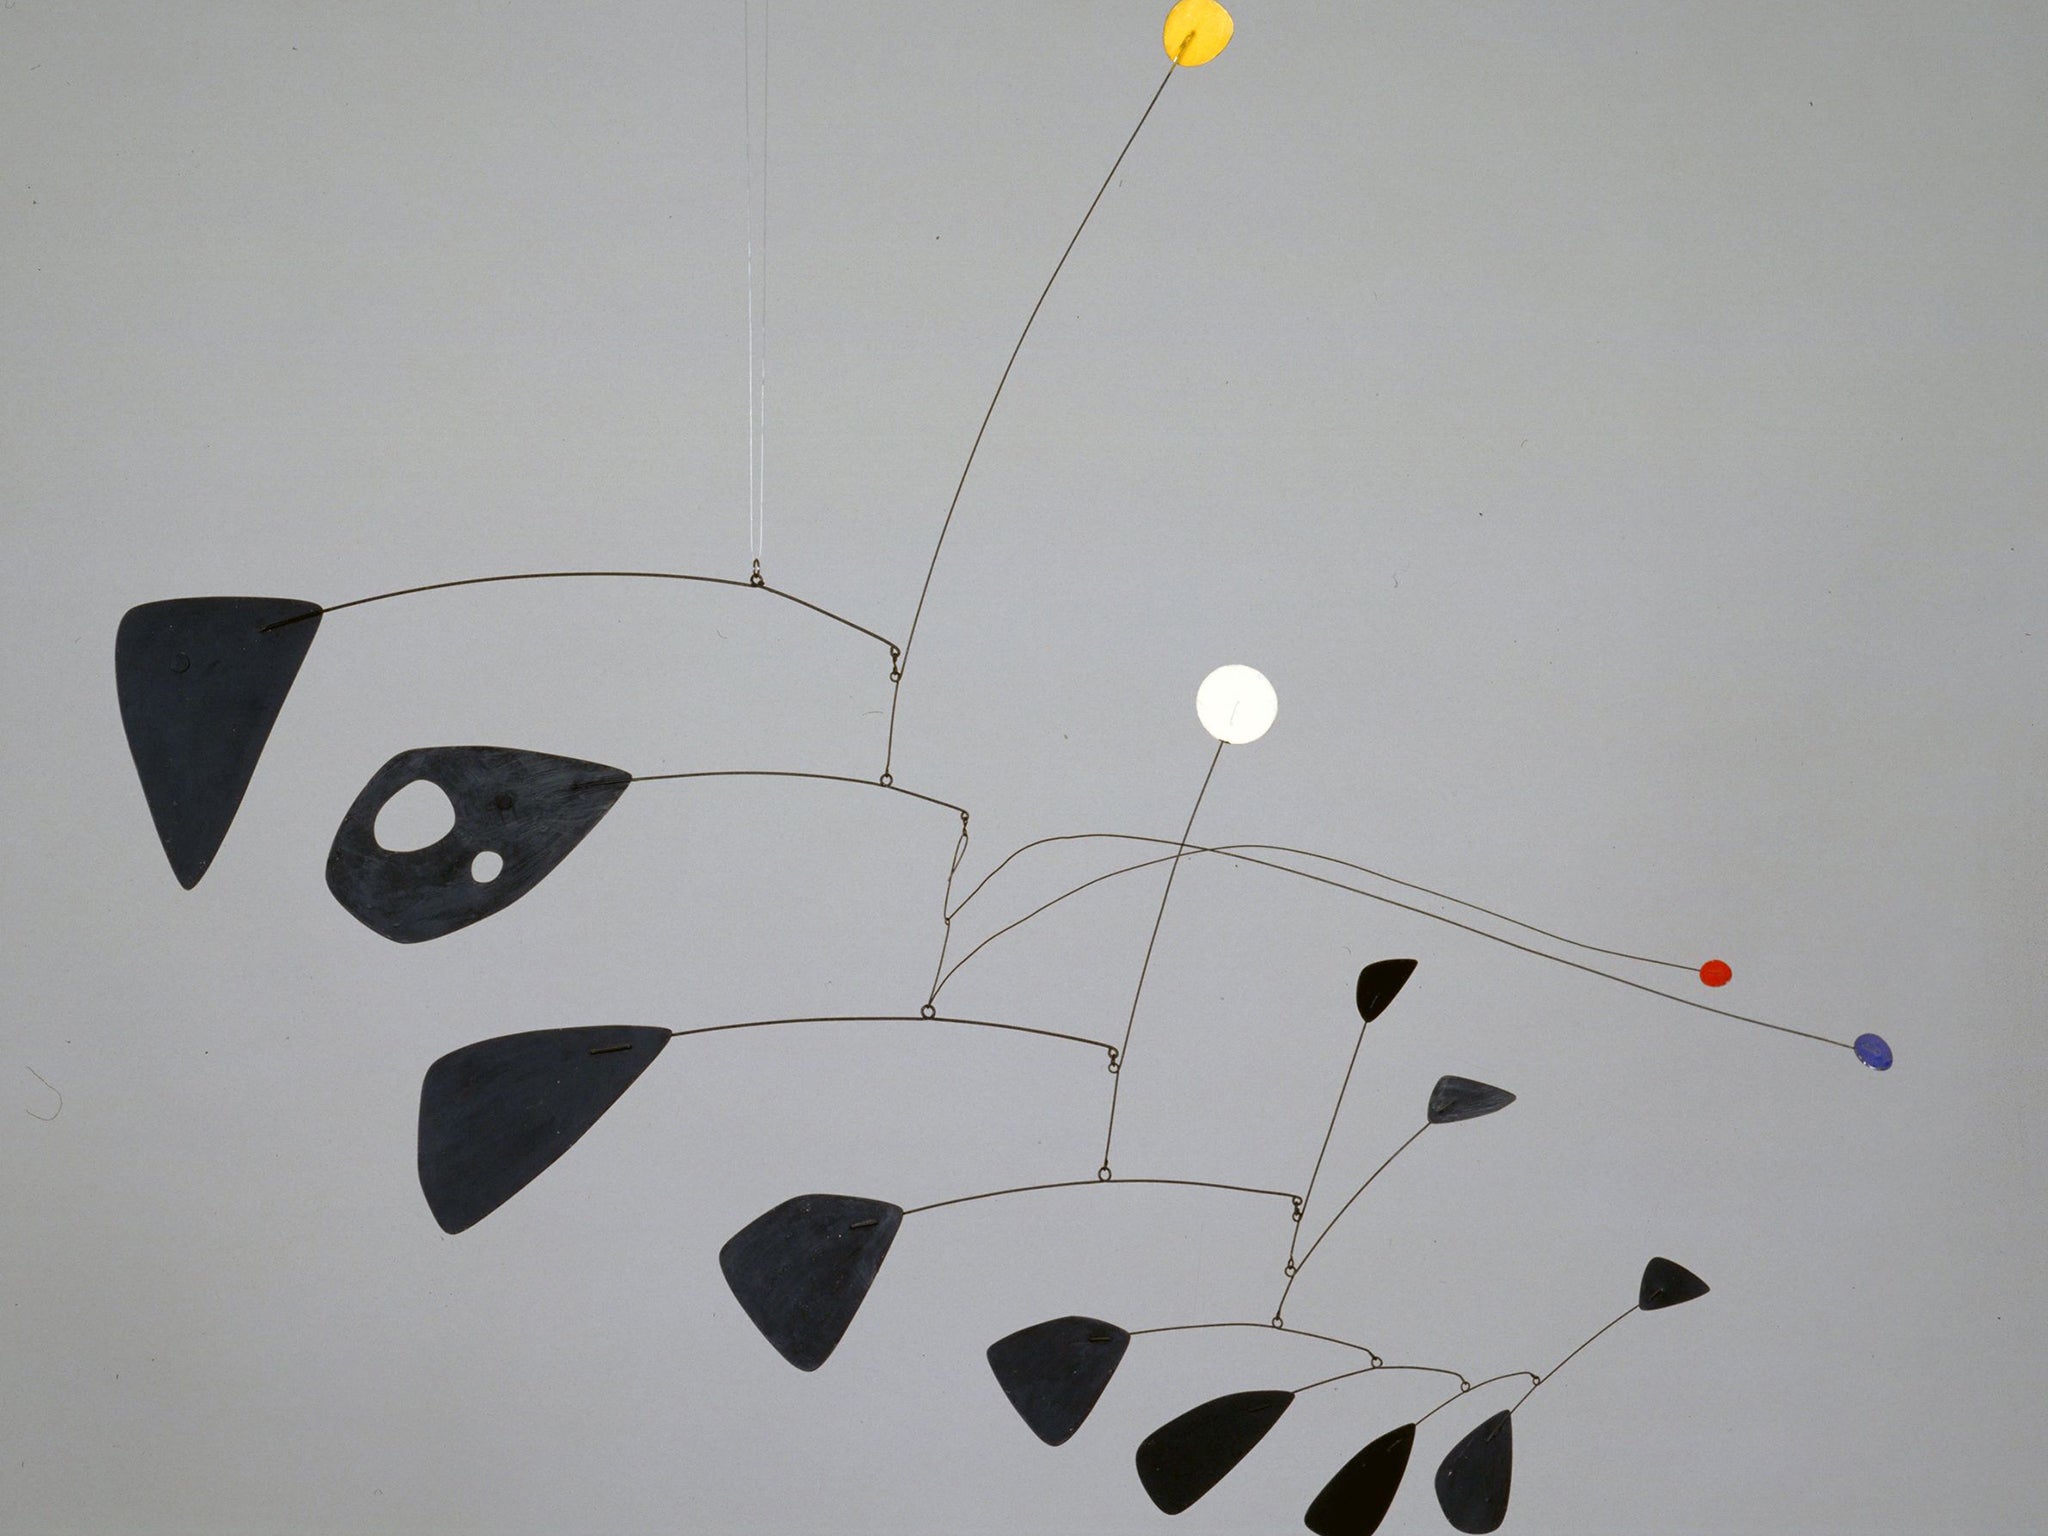 Alexander Calder (1898 - 1976), Antennae with Red and Blue Dots 1953